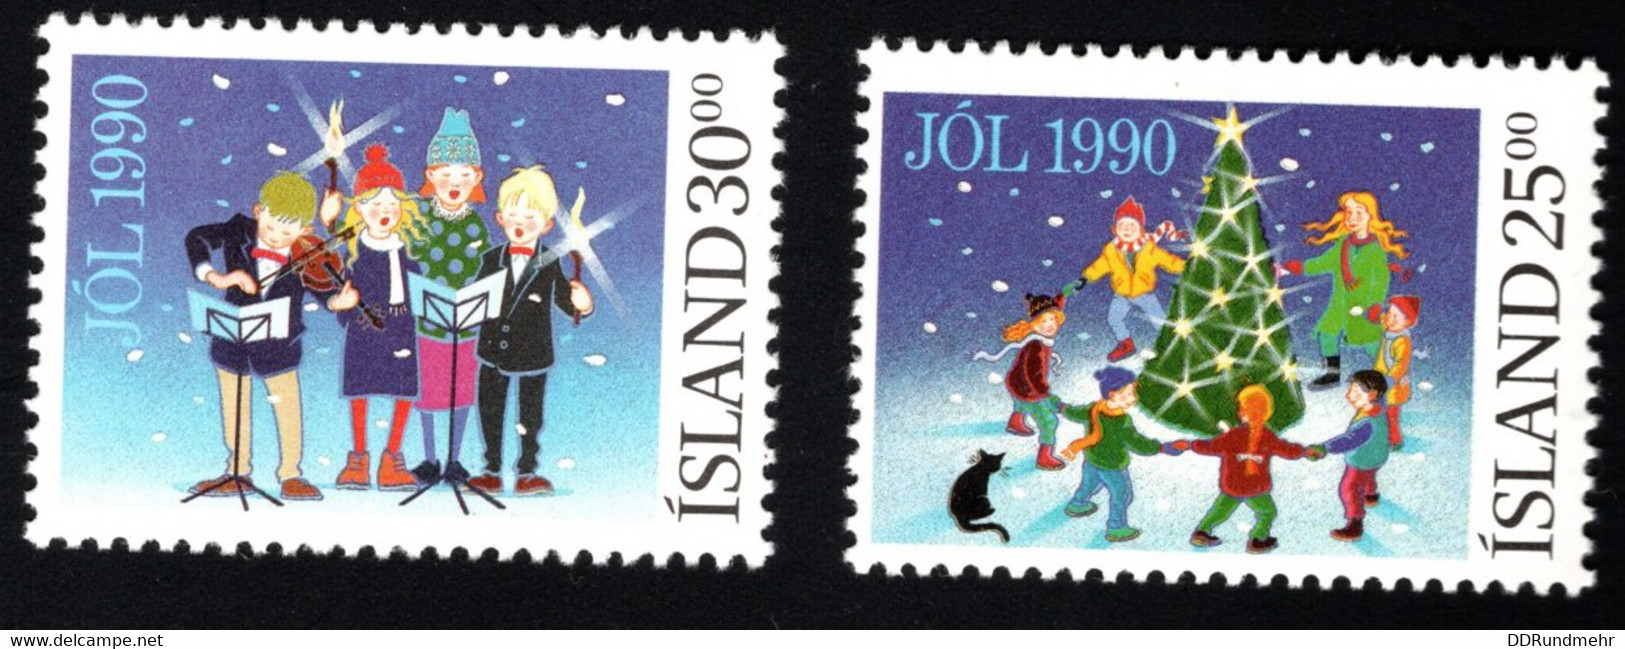 1990 Christmas Mi IS 736 - 737 Sn IS 716 - 717 Yt IS 689 - 690 Sg IS 761 - 762 Xx MNH - Ungebraucht